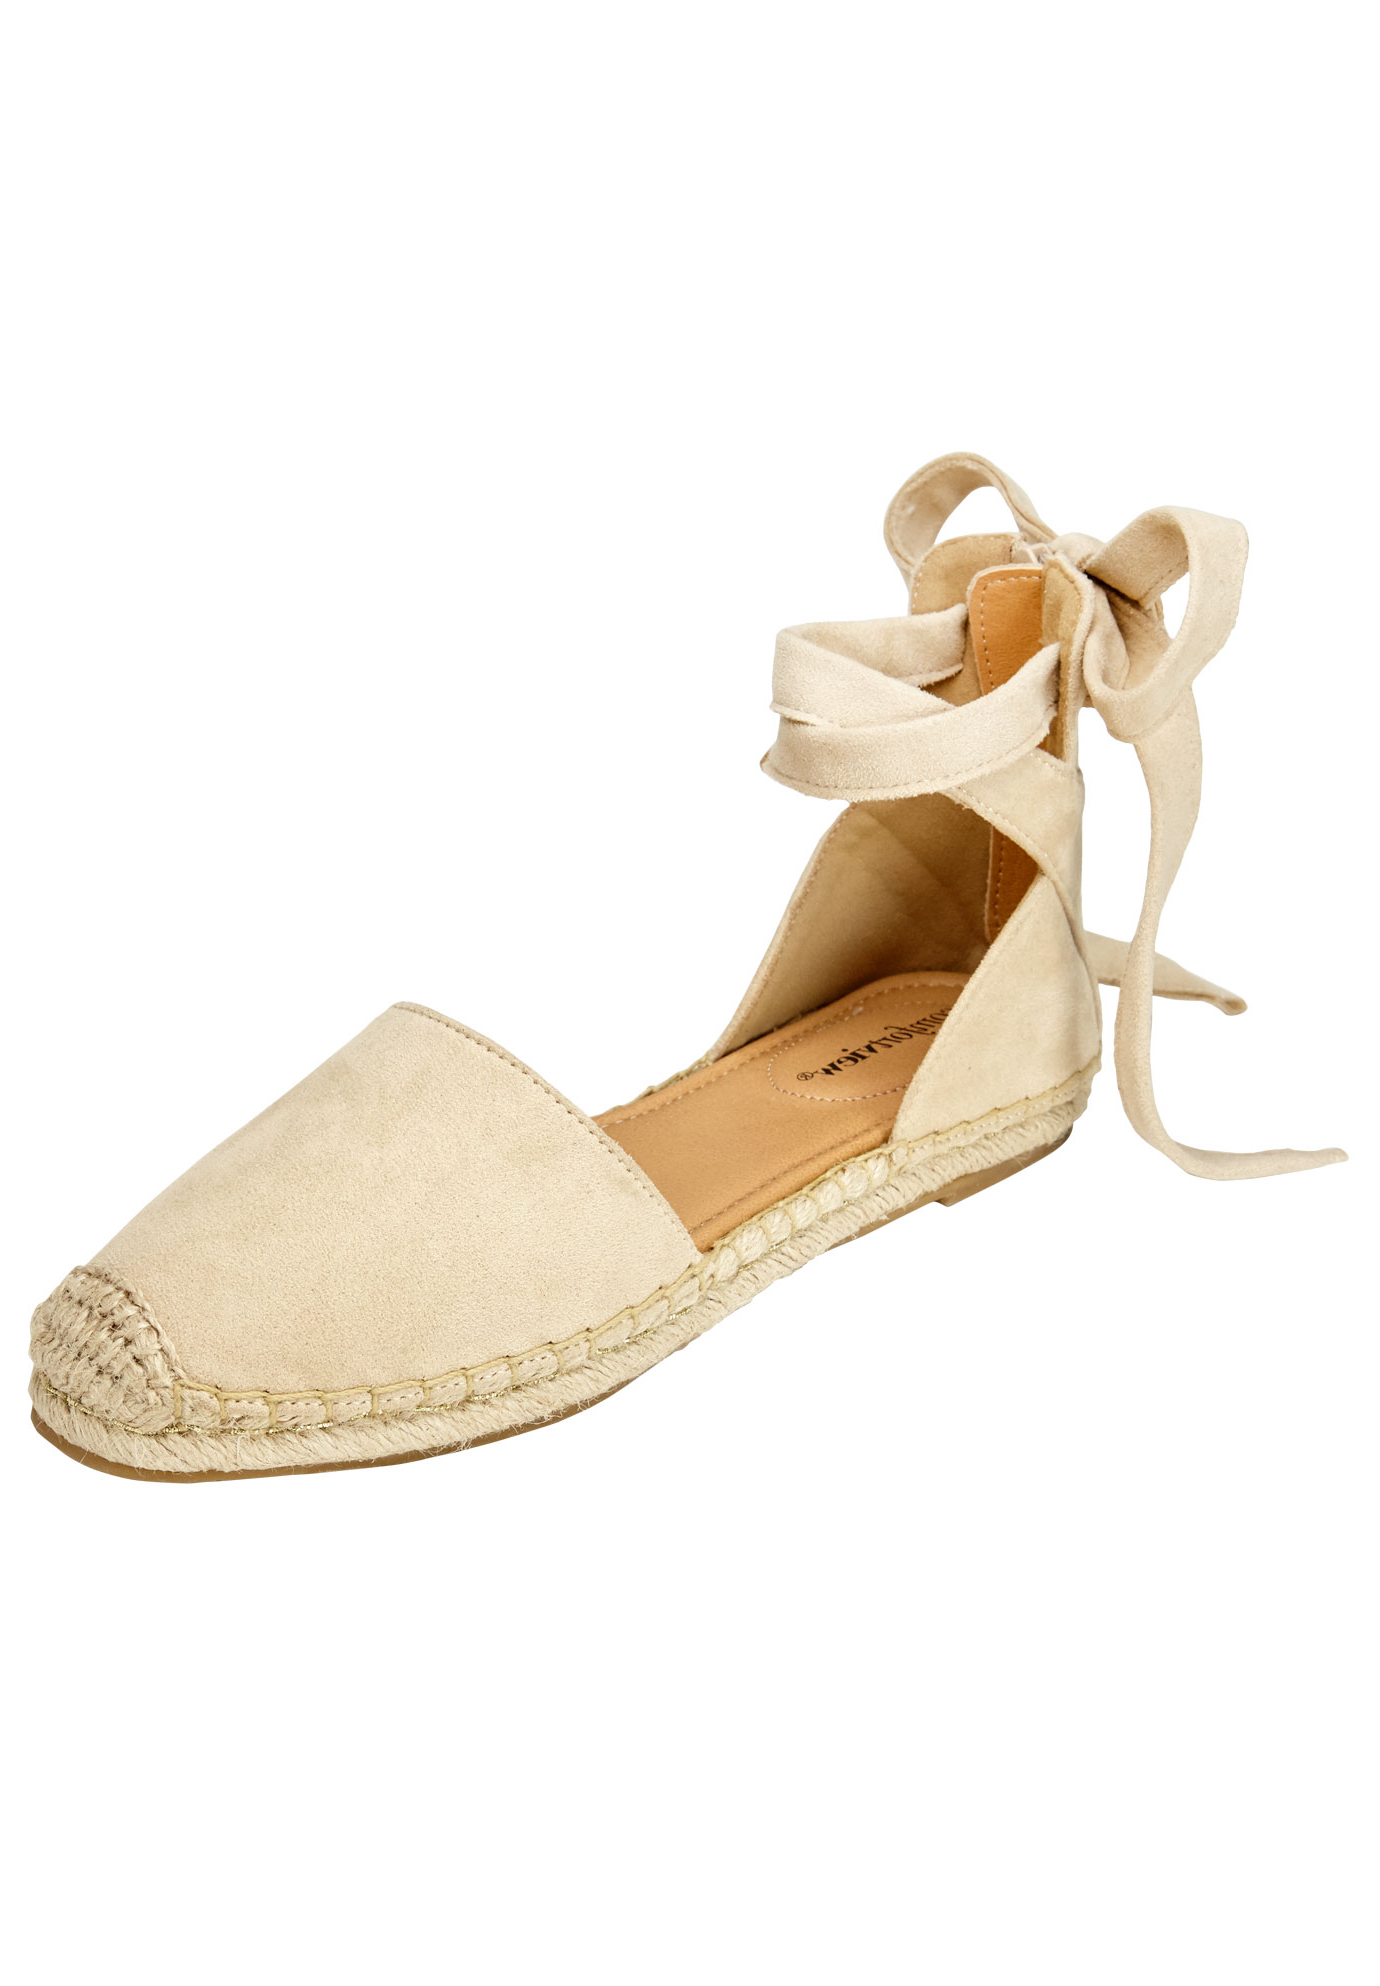 Comfortview Women's Wide Width The Shayla Flat Espadrille Shoes - image 1 of 7